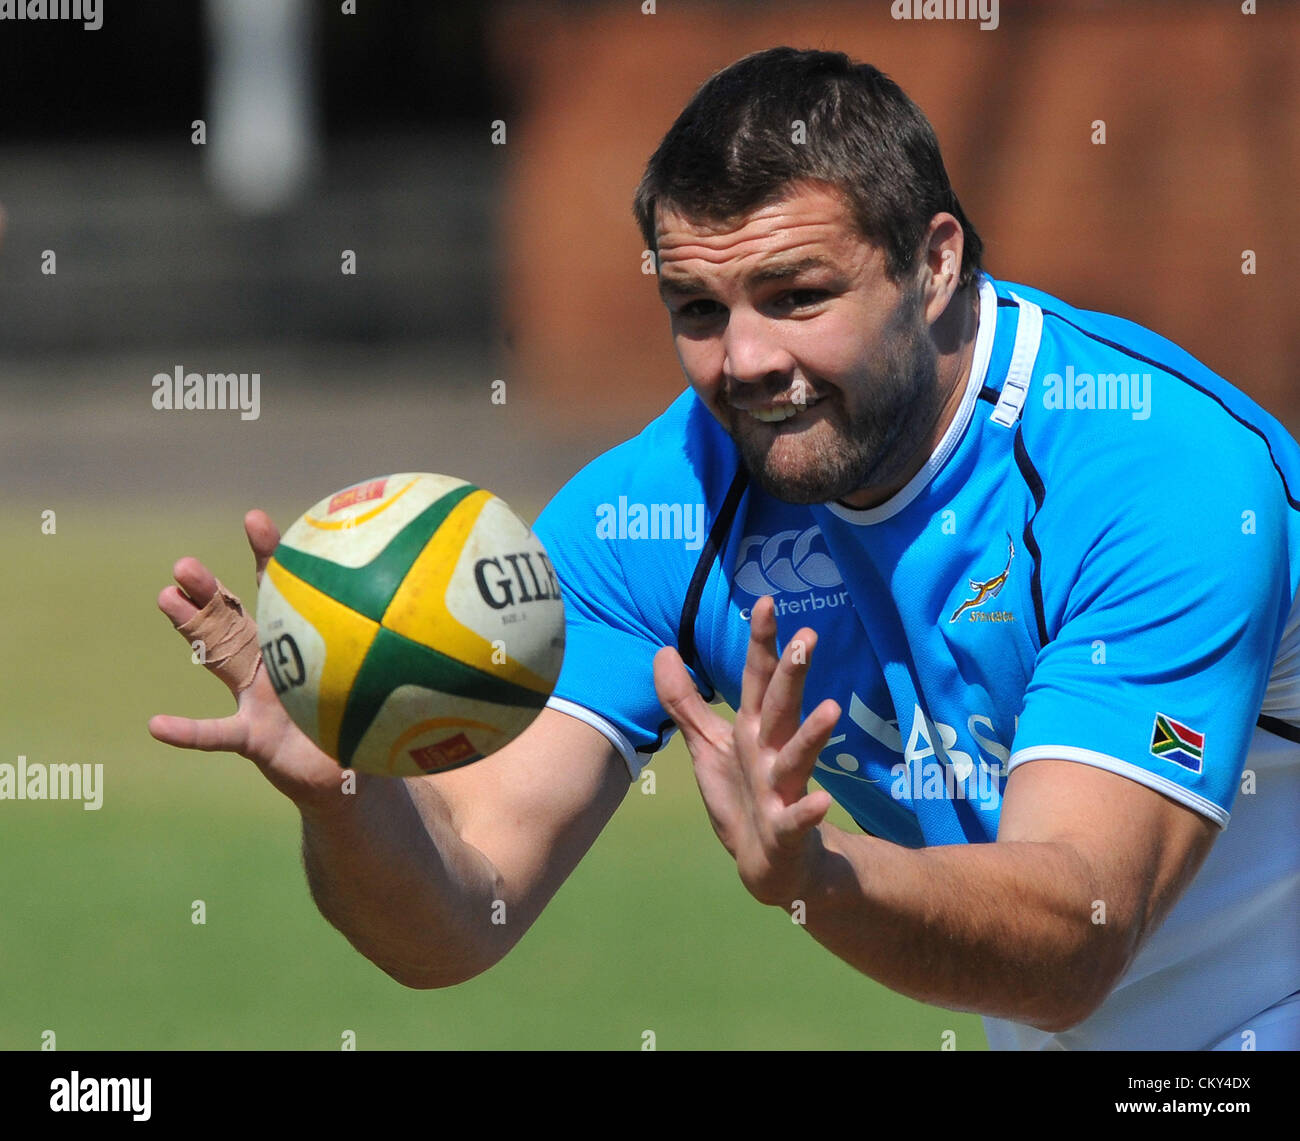 JOHANNESBURG, SOUTH AFRICA - SEPTEMBER 01, Flip van der Merwe receives the ball during the South African national rugby team field session and media conference at KES on September 01, 2012 in Johannesburg, South Africa Photo by Duif du Toit / Gallo Images Stock Photo